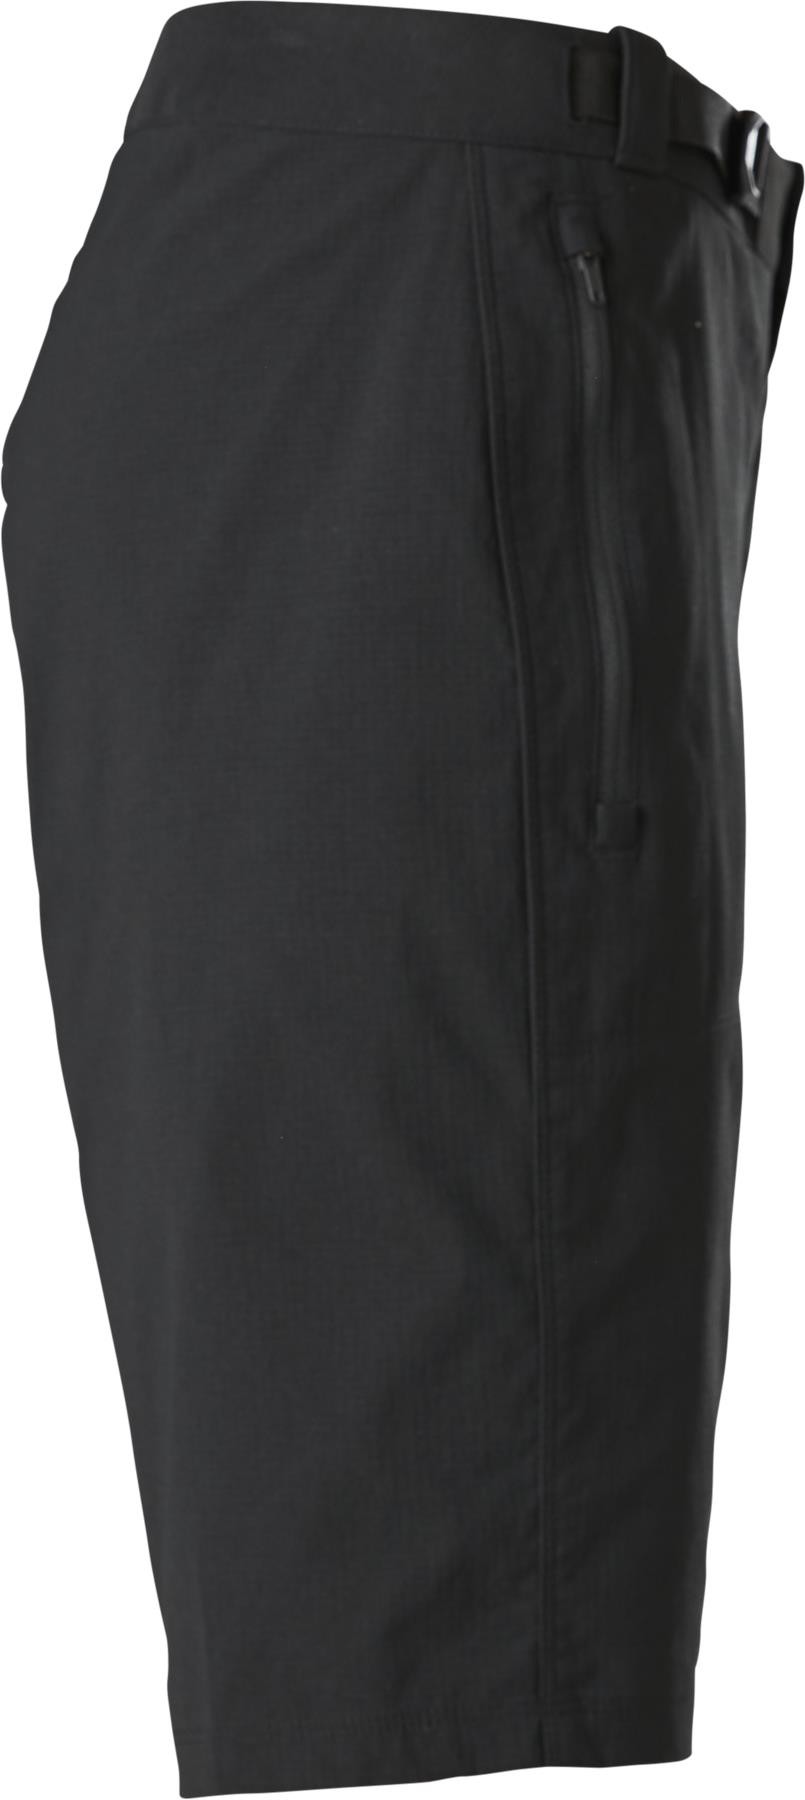 Ranger Womens Cycling Shorts with Liner image 2